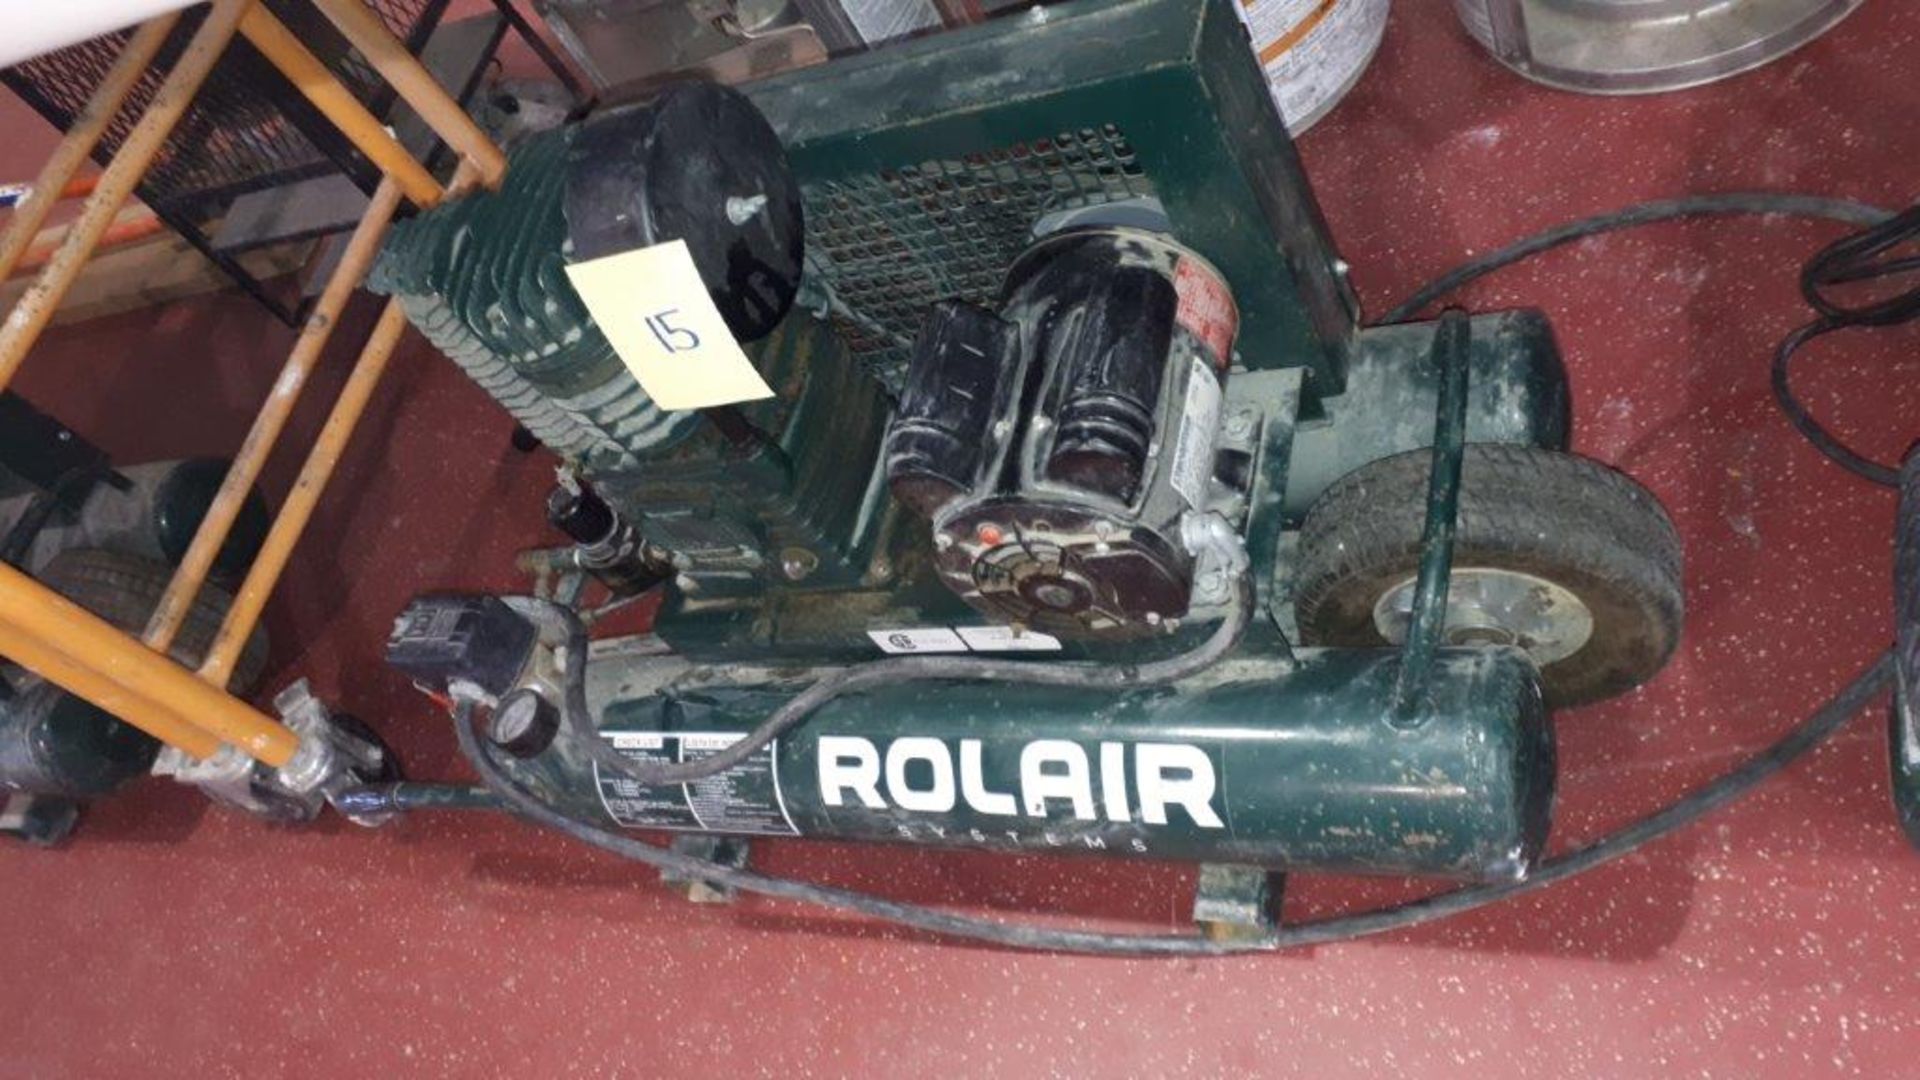 ROLLAR SYSTEM Portable Air Compressor - Image 2 of 3